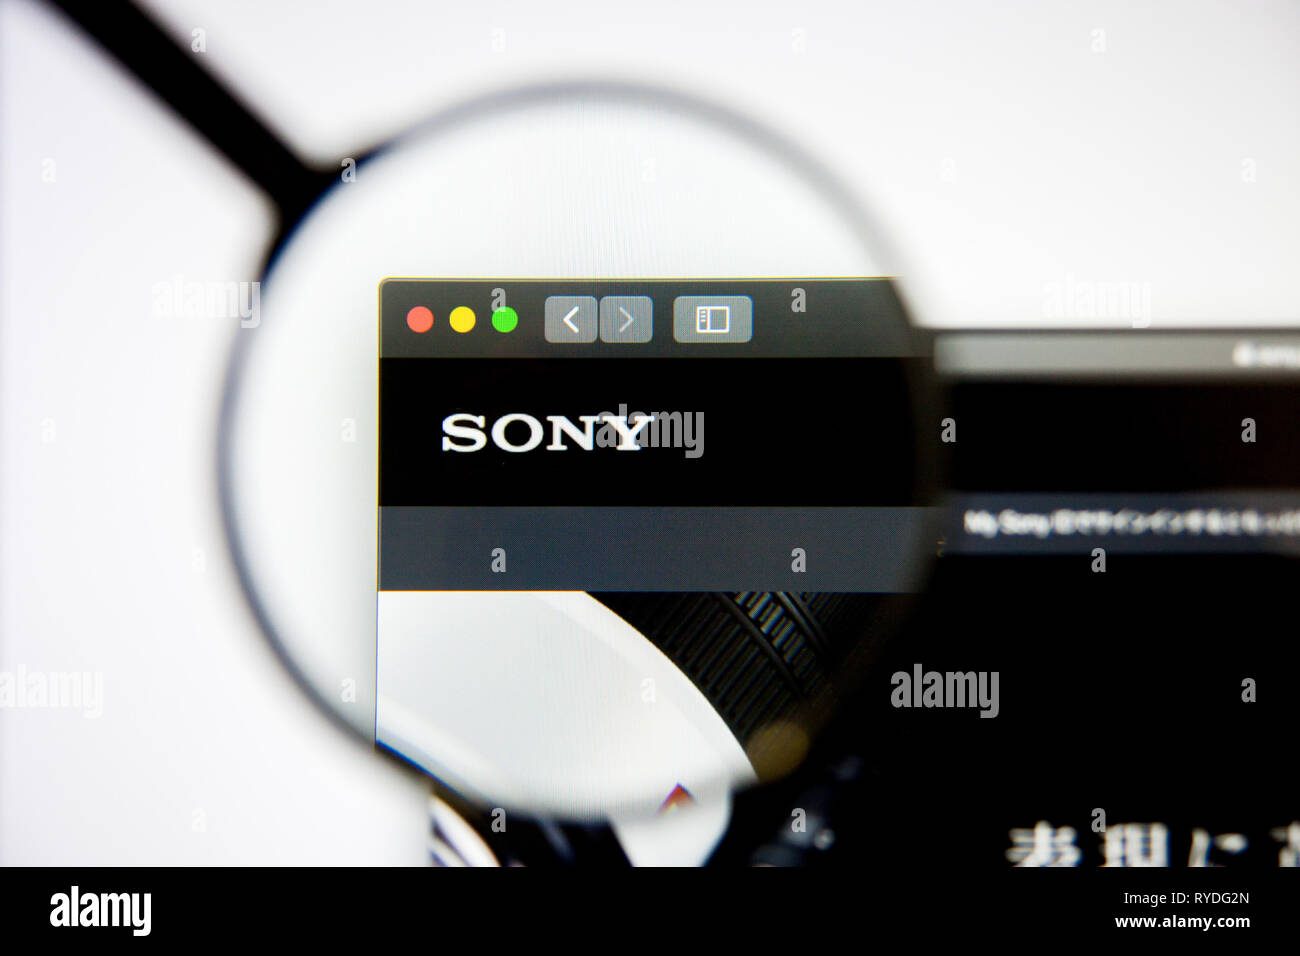 Los Angeles, California, USA - 5 March 2019: Sony website homepage. Sony logo visible on display screen, Illustrative Editorial Stock Photo